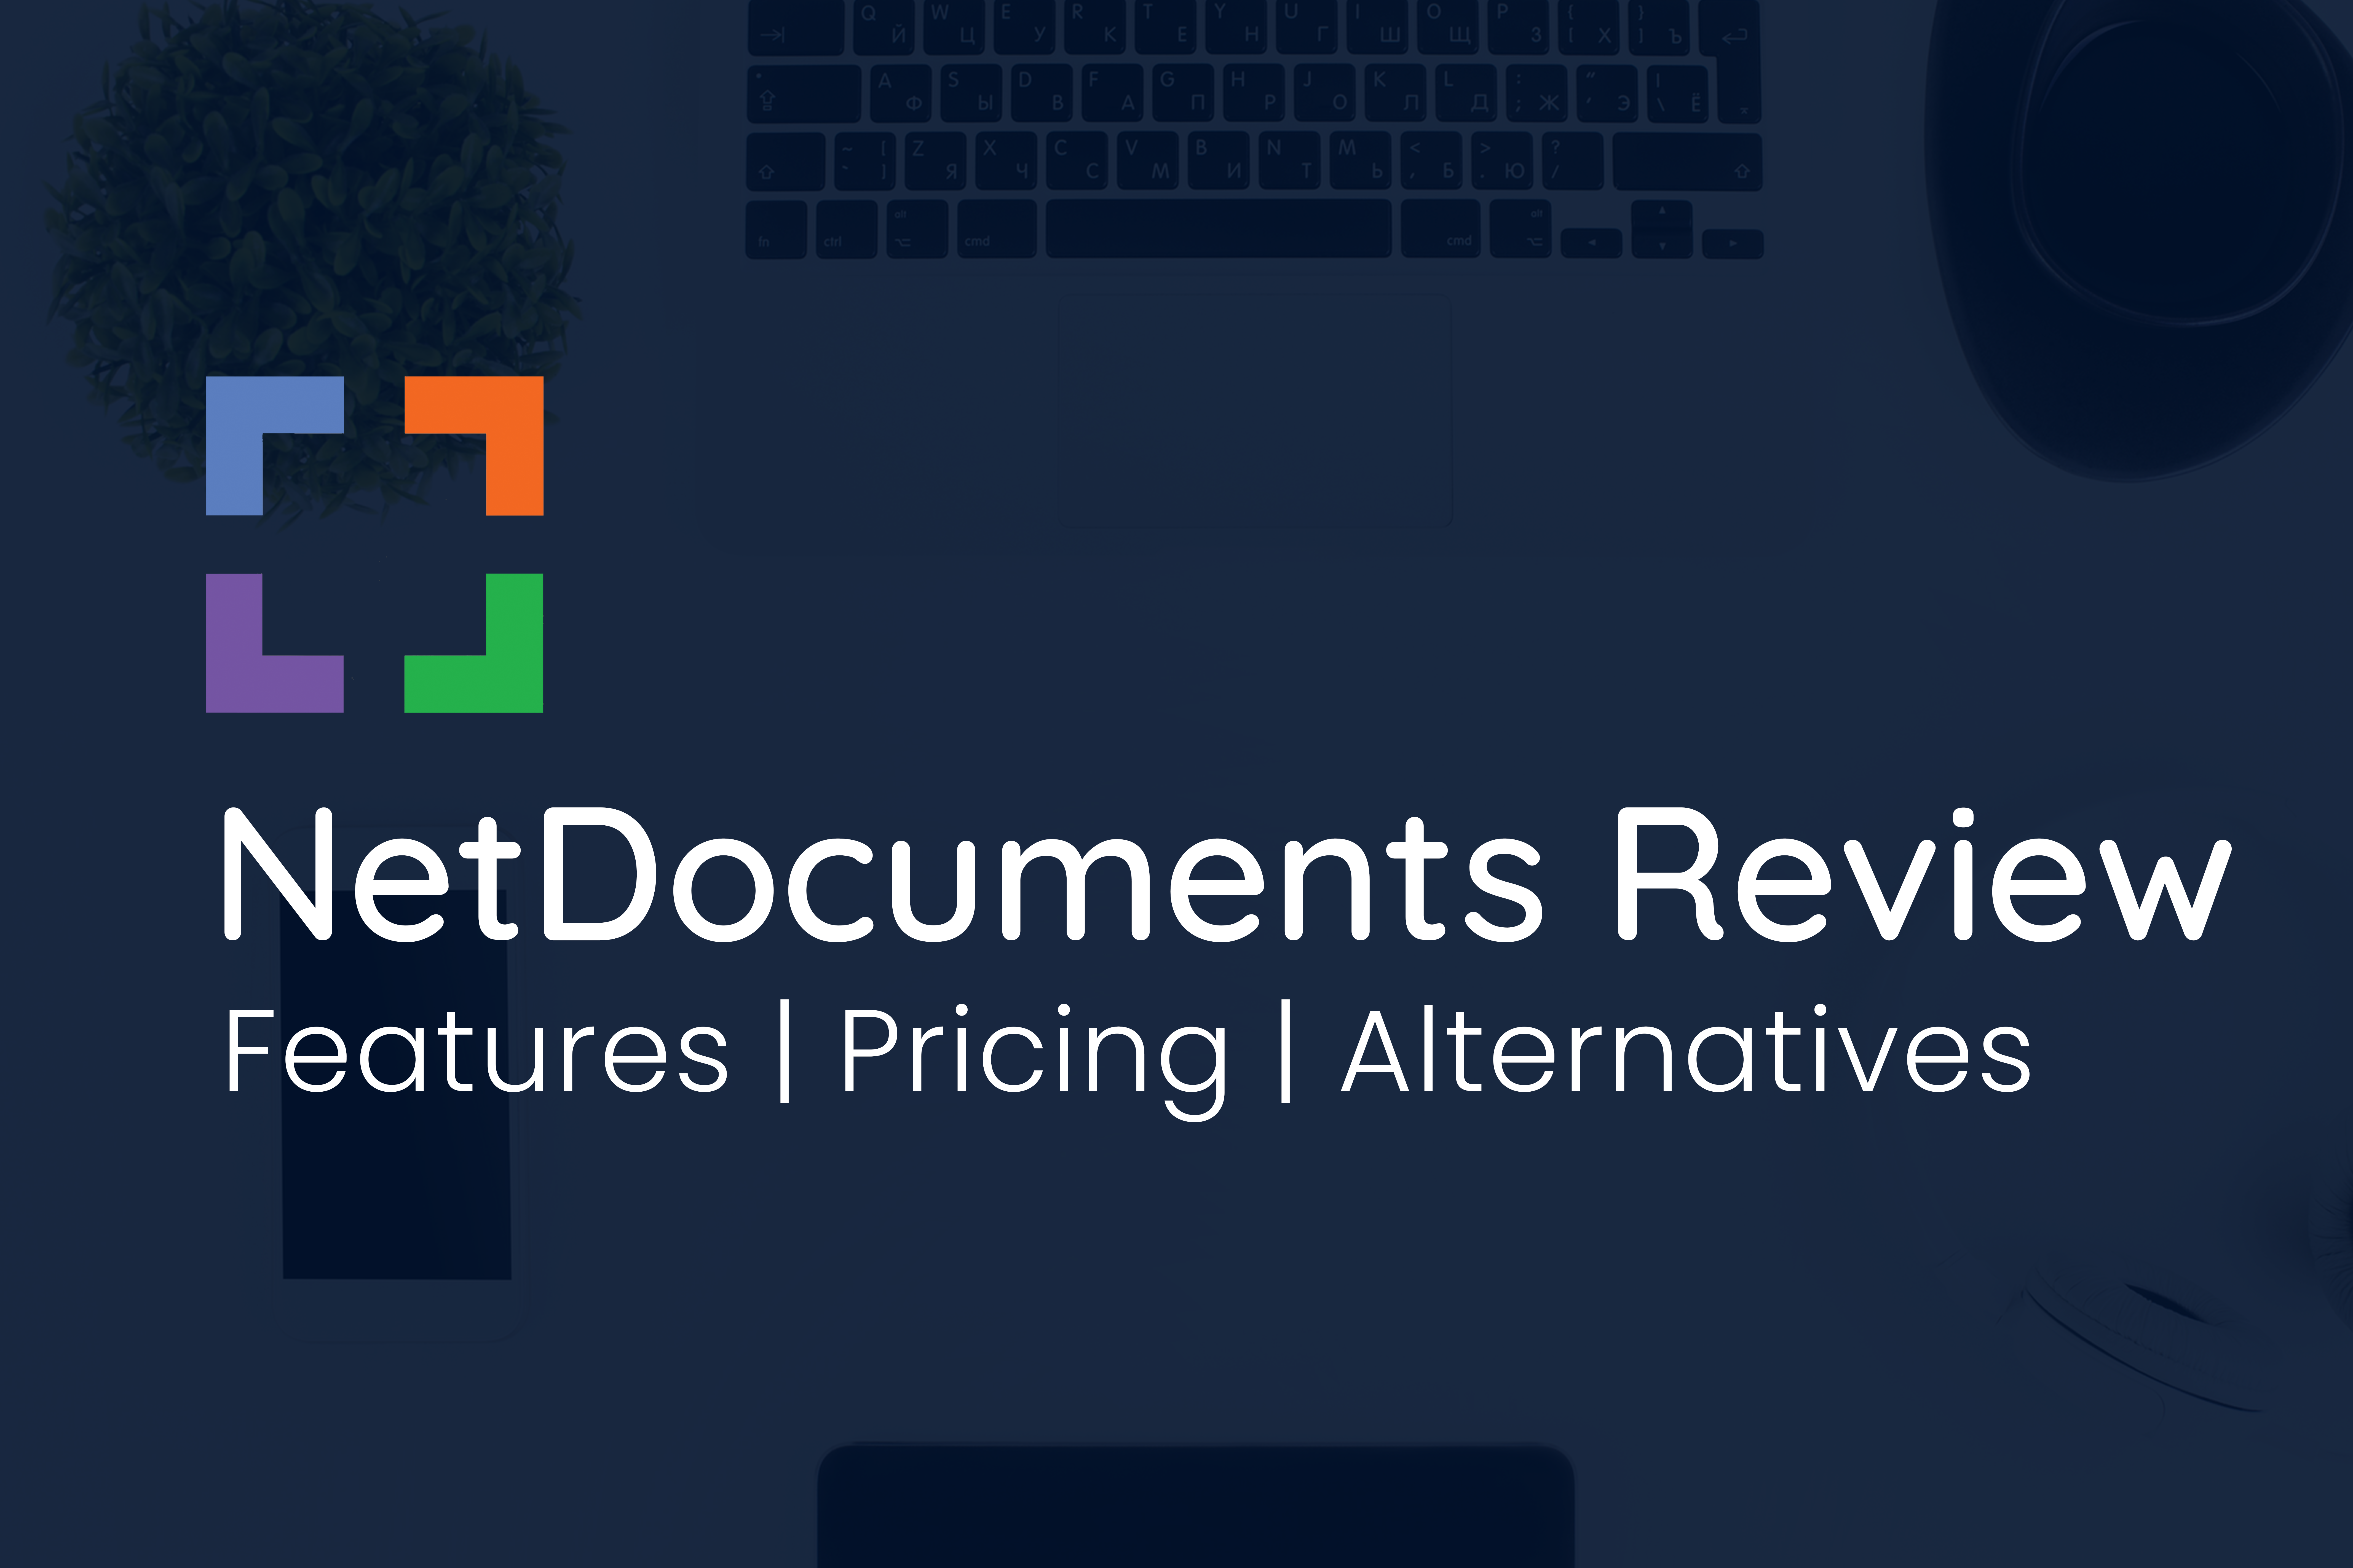 NetDocuments Review